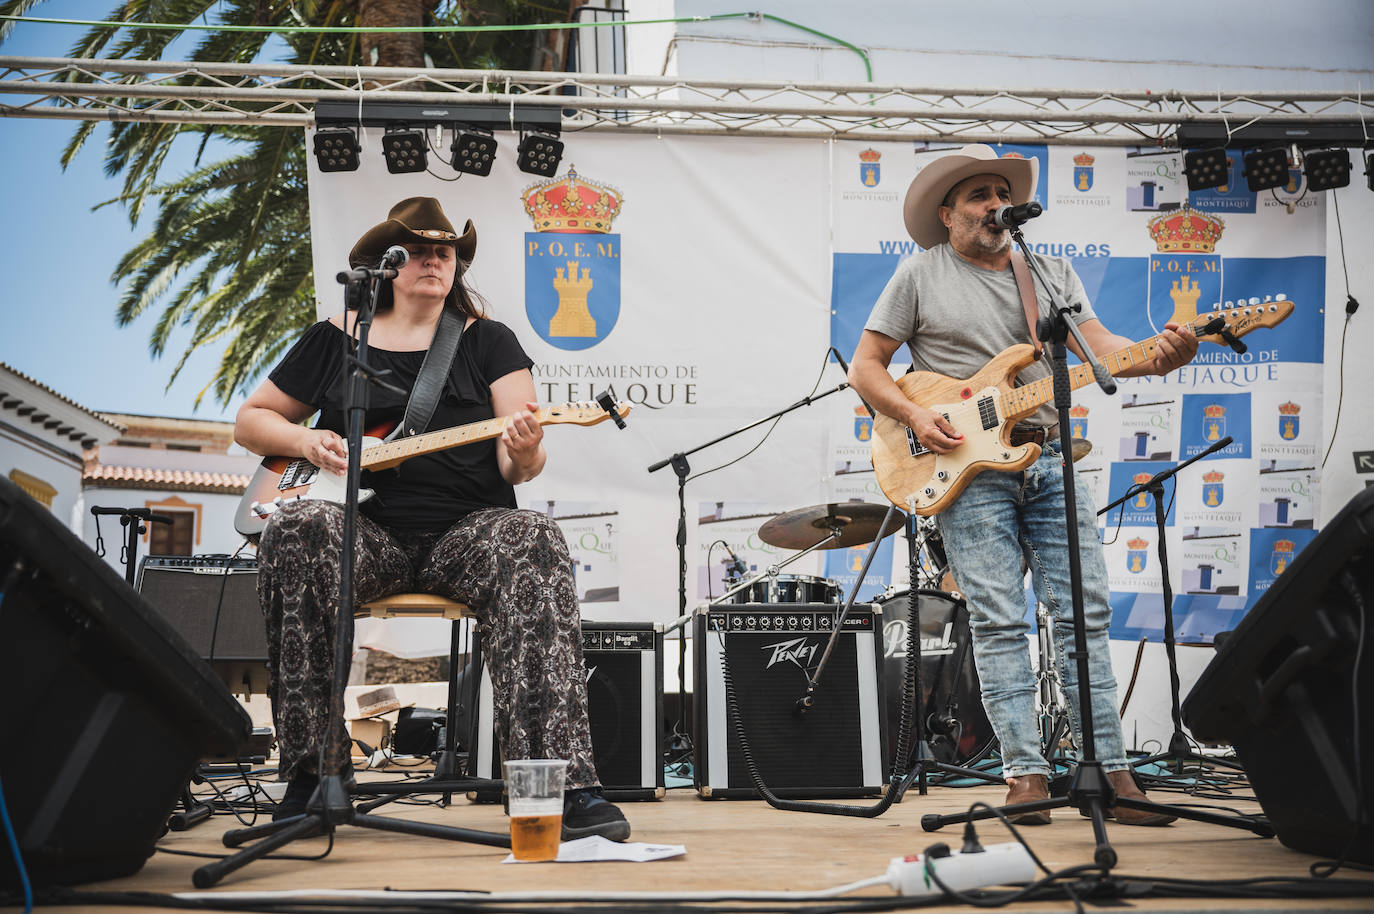 More than 60 musicians, most of them international bands from the United States, performed in Ronda, Montejaque, Grazalema and Villaluenga del Rosario